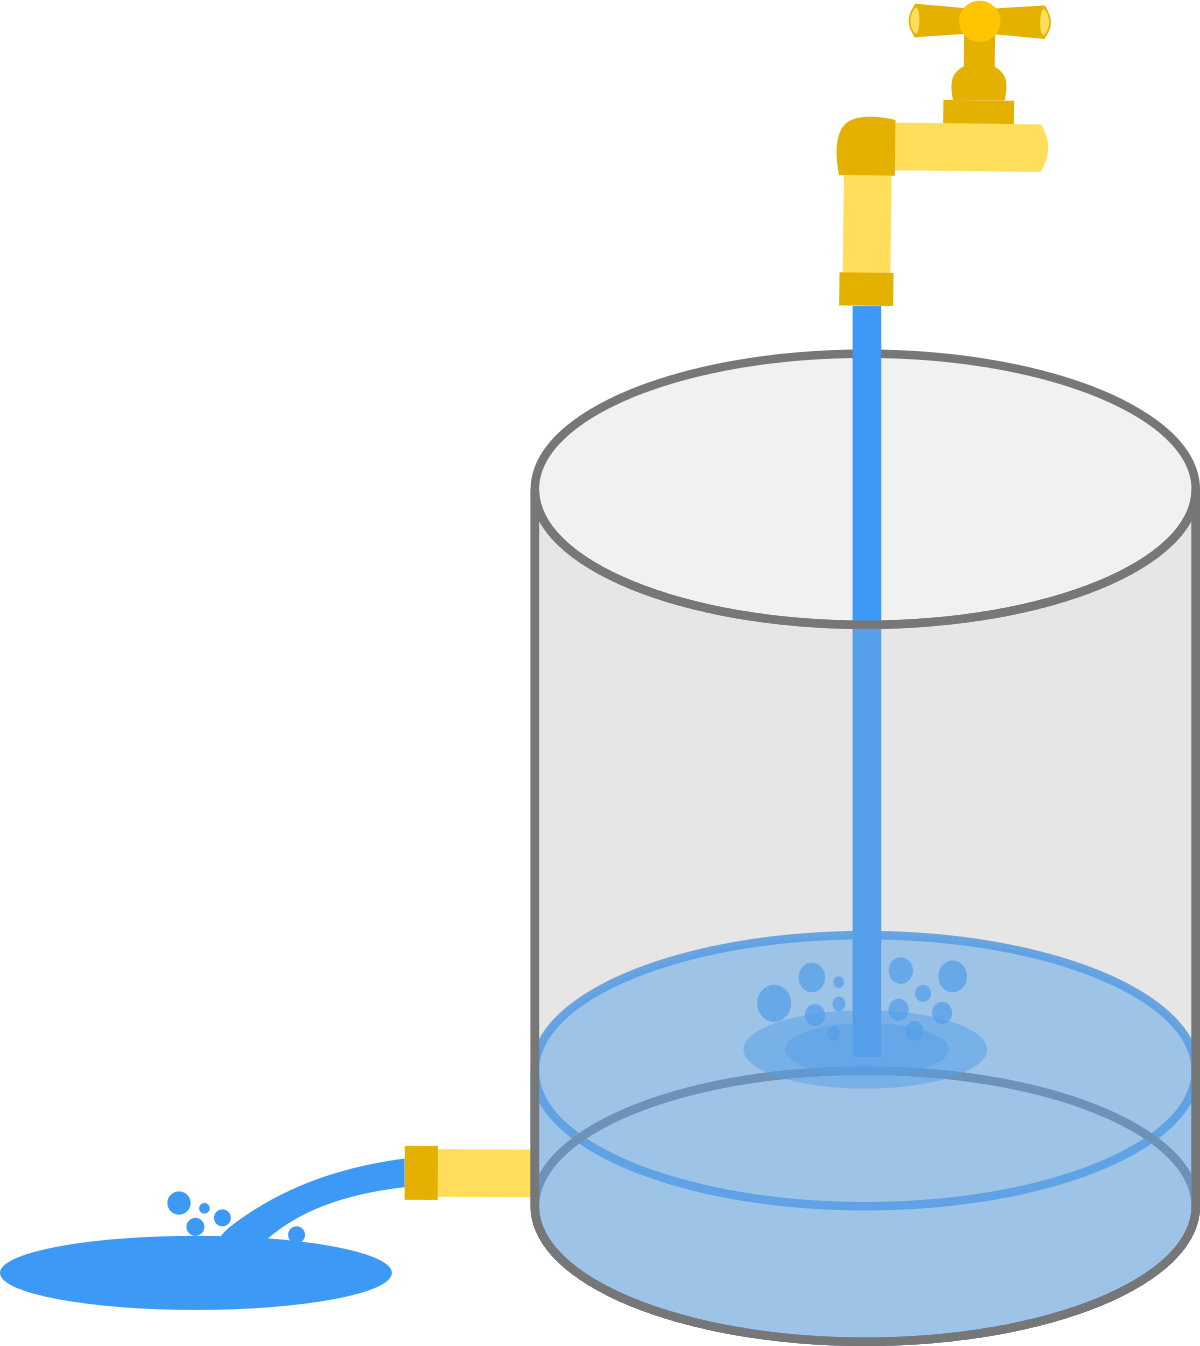 You Fill A Cylindrical Water Tank, With The Bottom - Classical Mechanics (1200x1346)